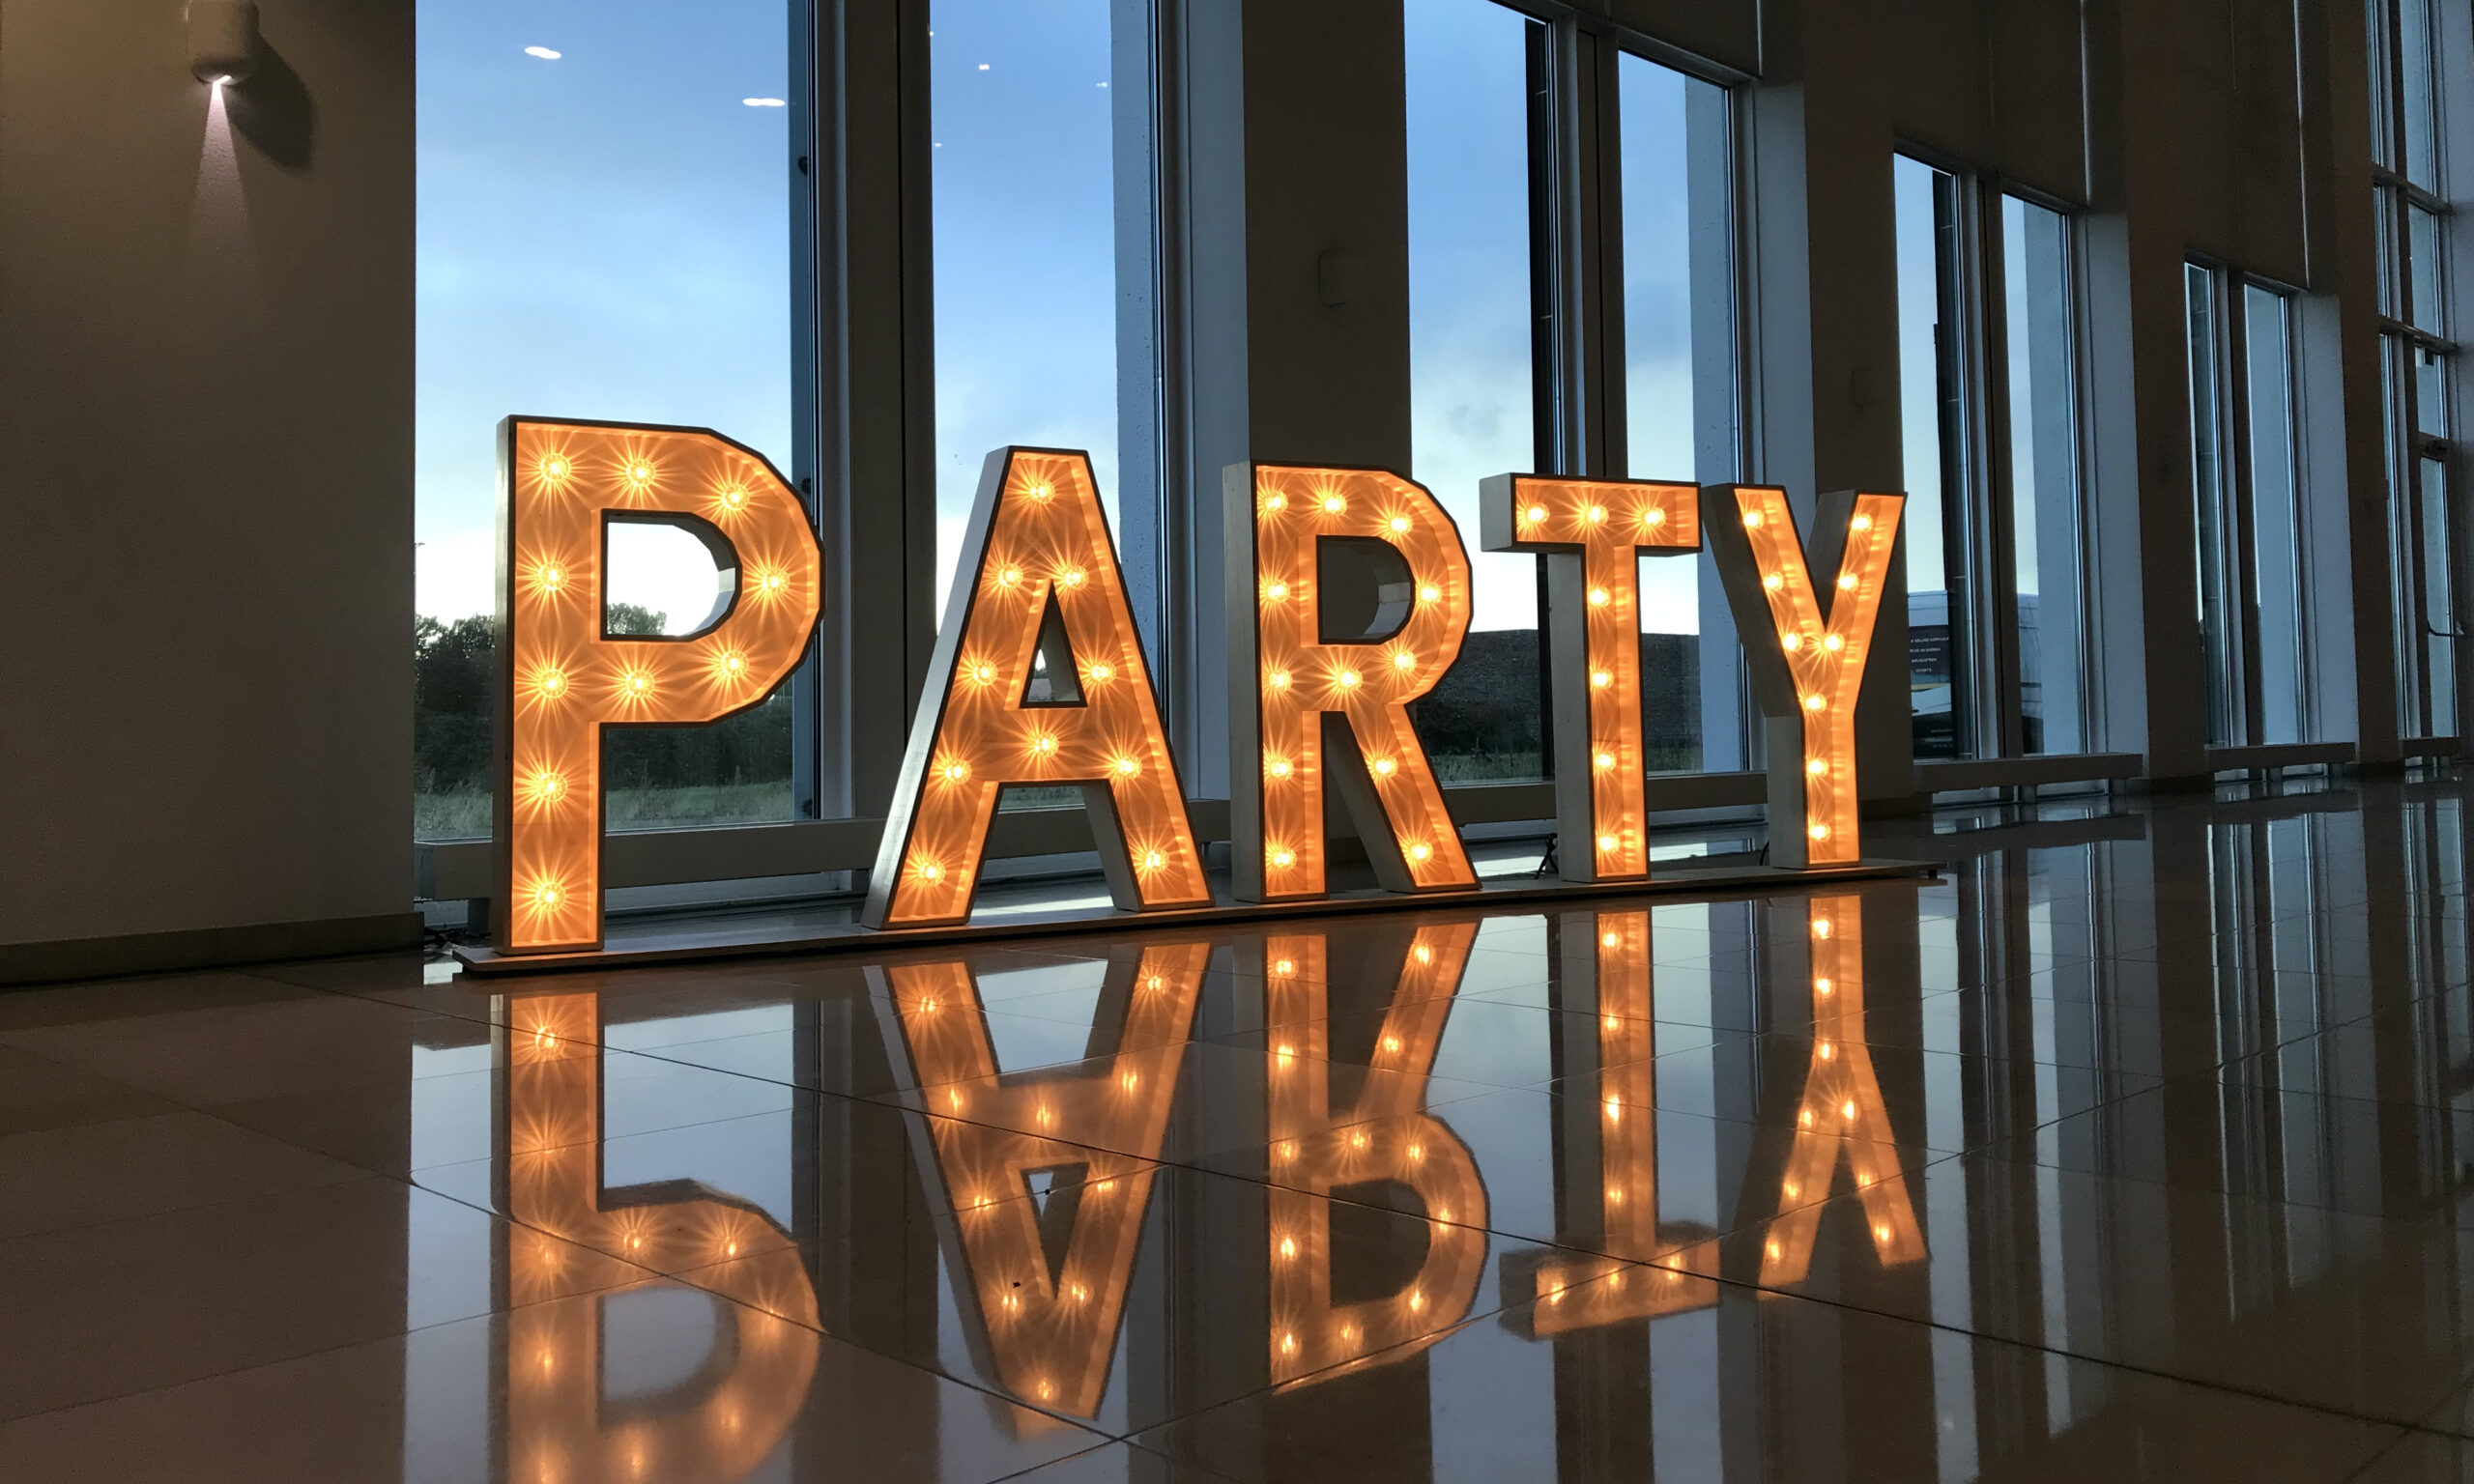 PARTY Led letters